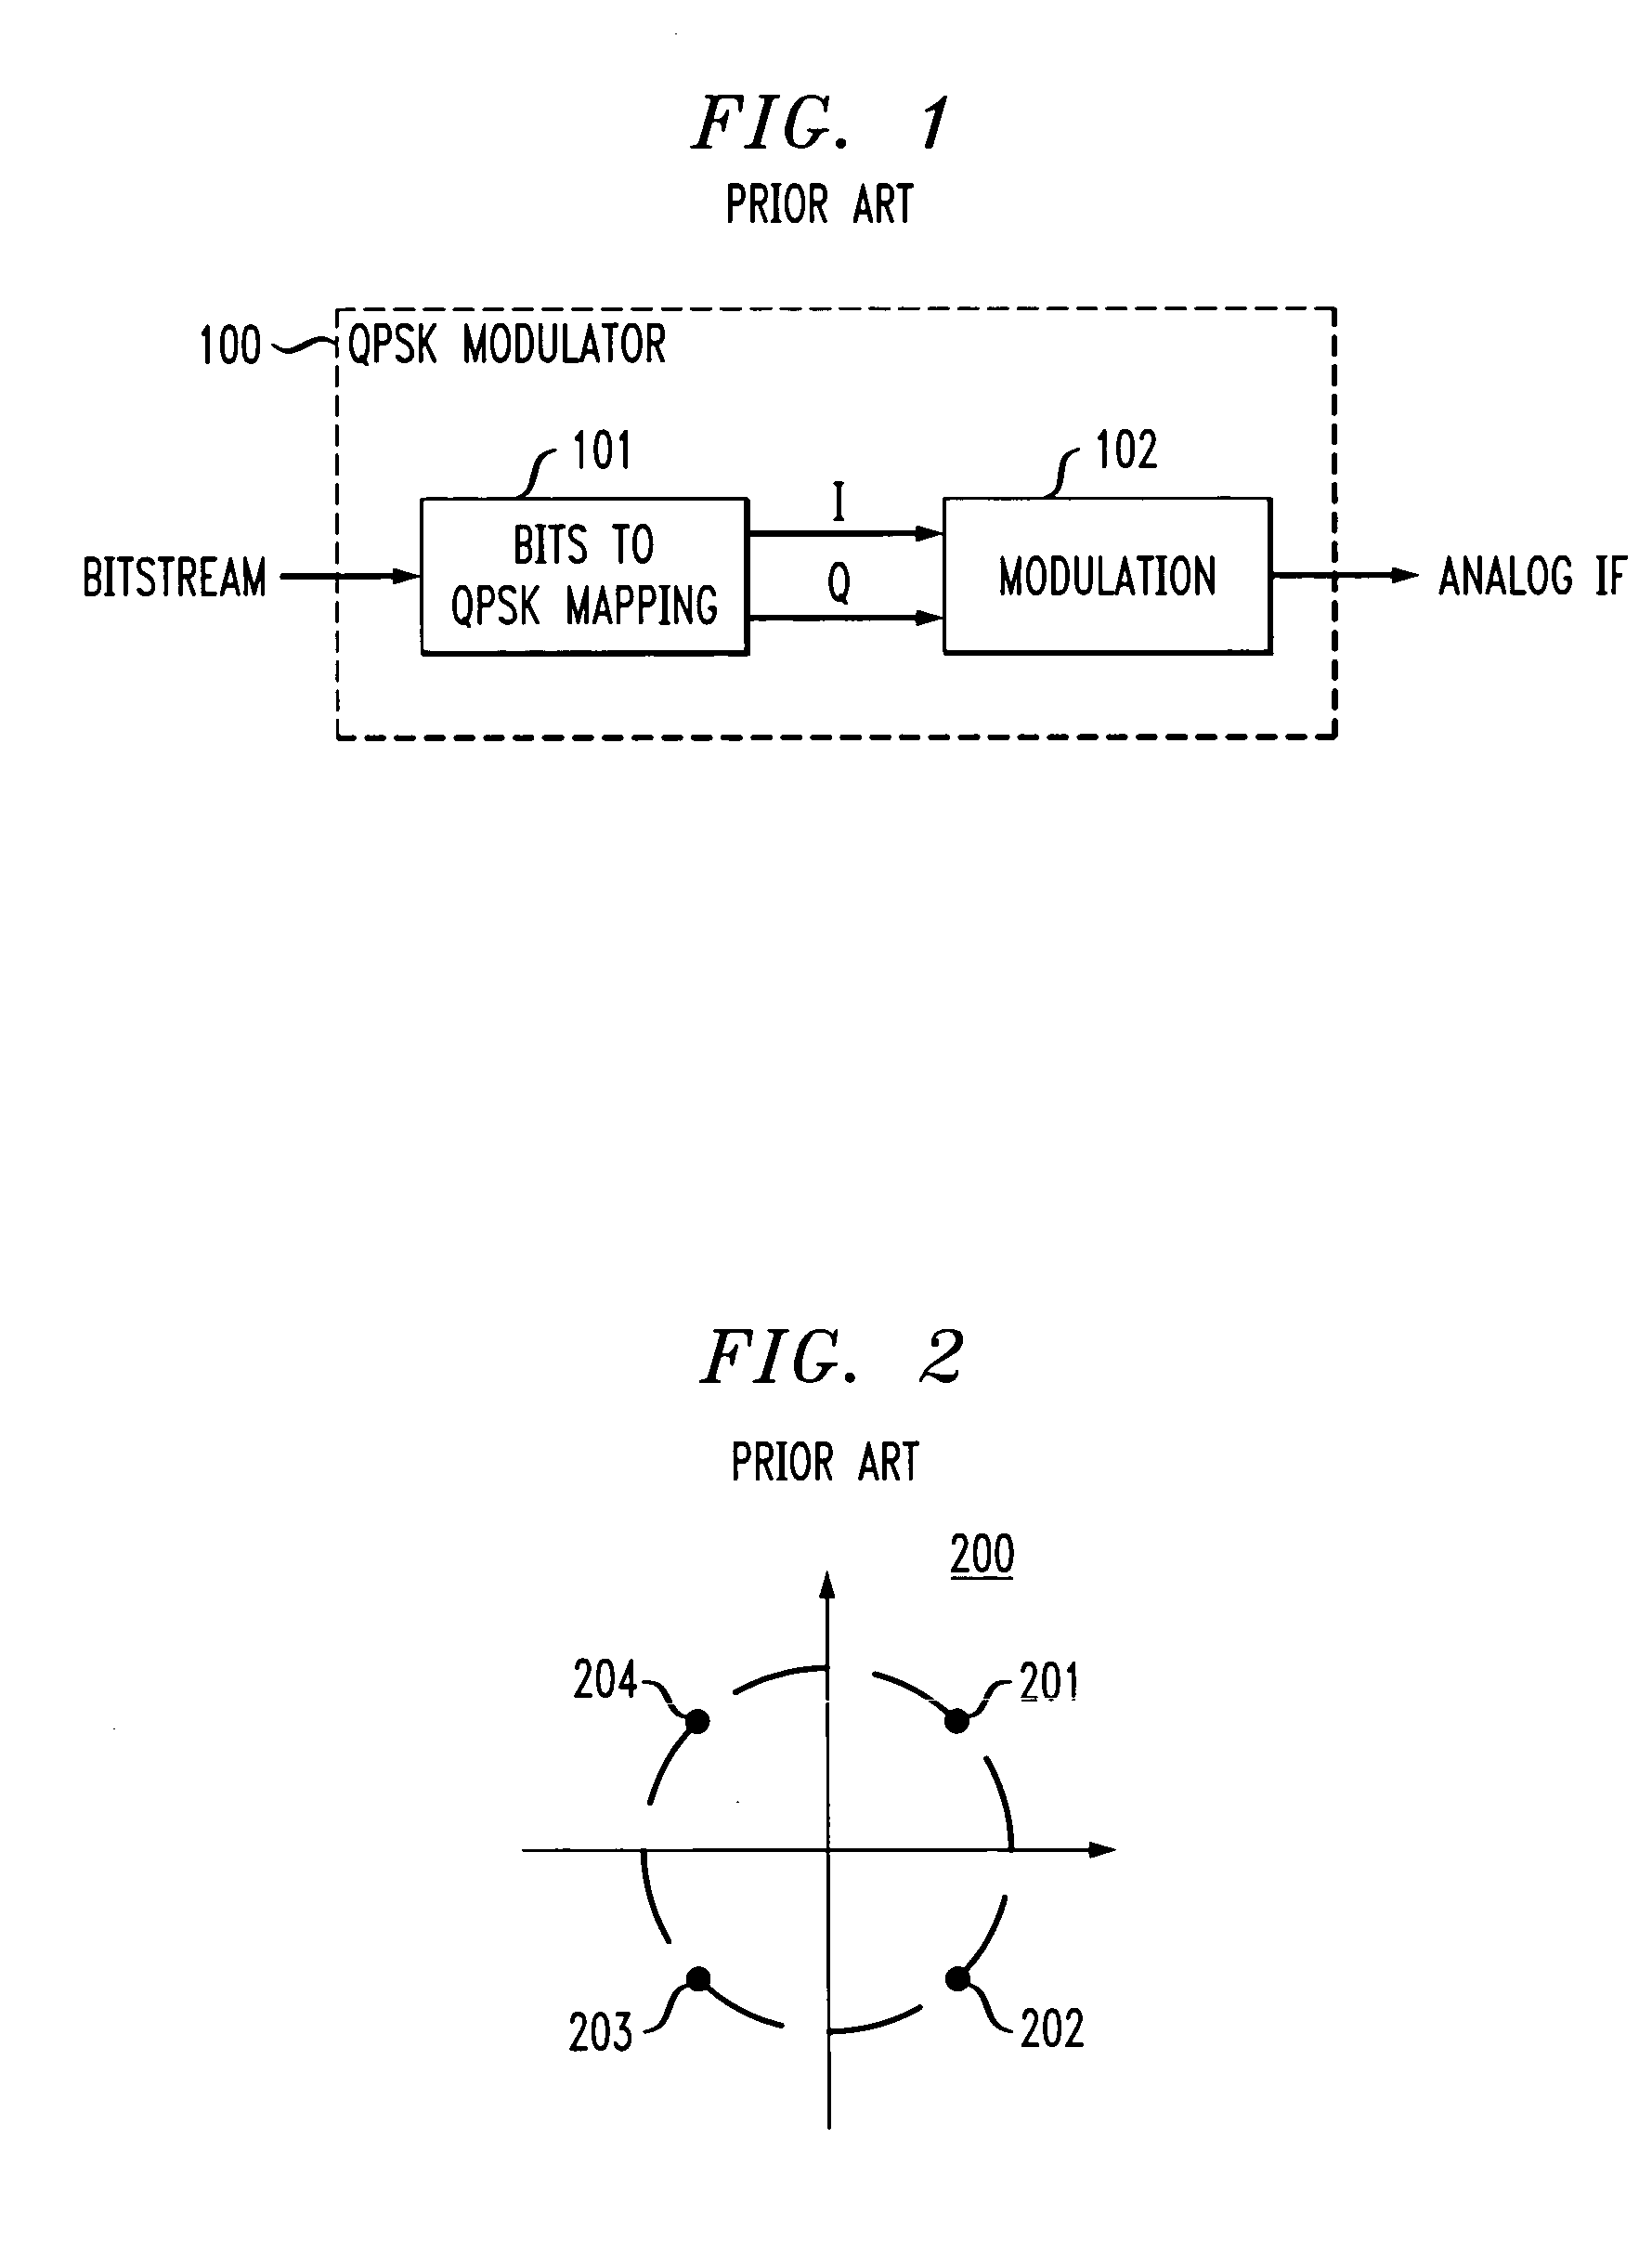 Method and apparatus for providing local channels in a global satellite/terrestrial network